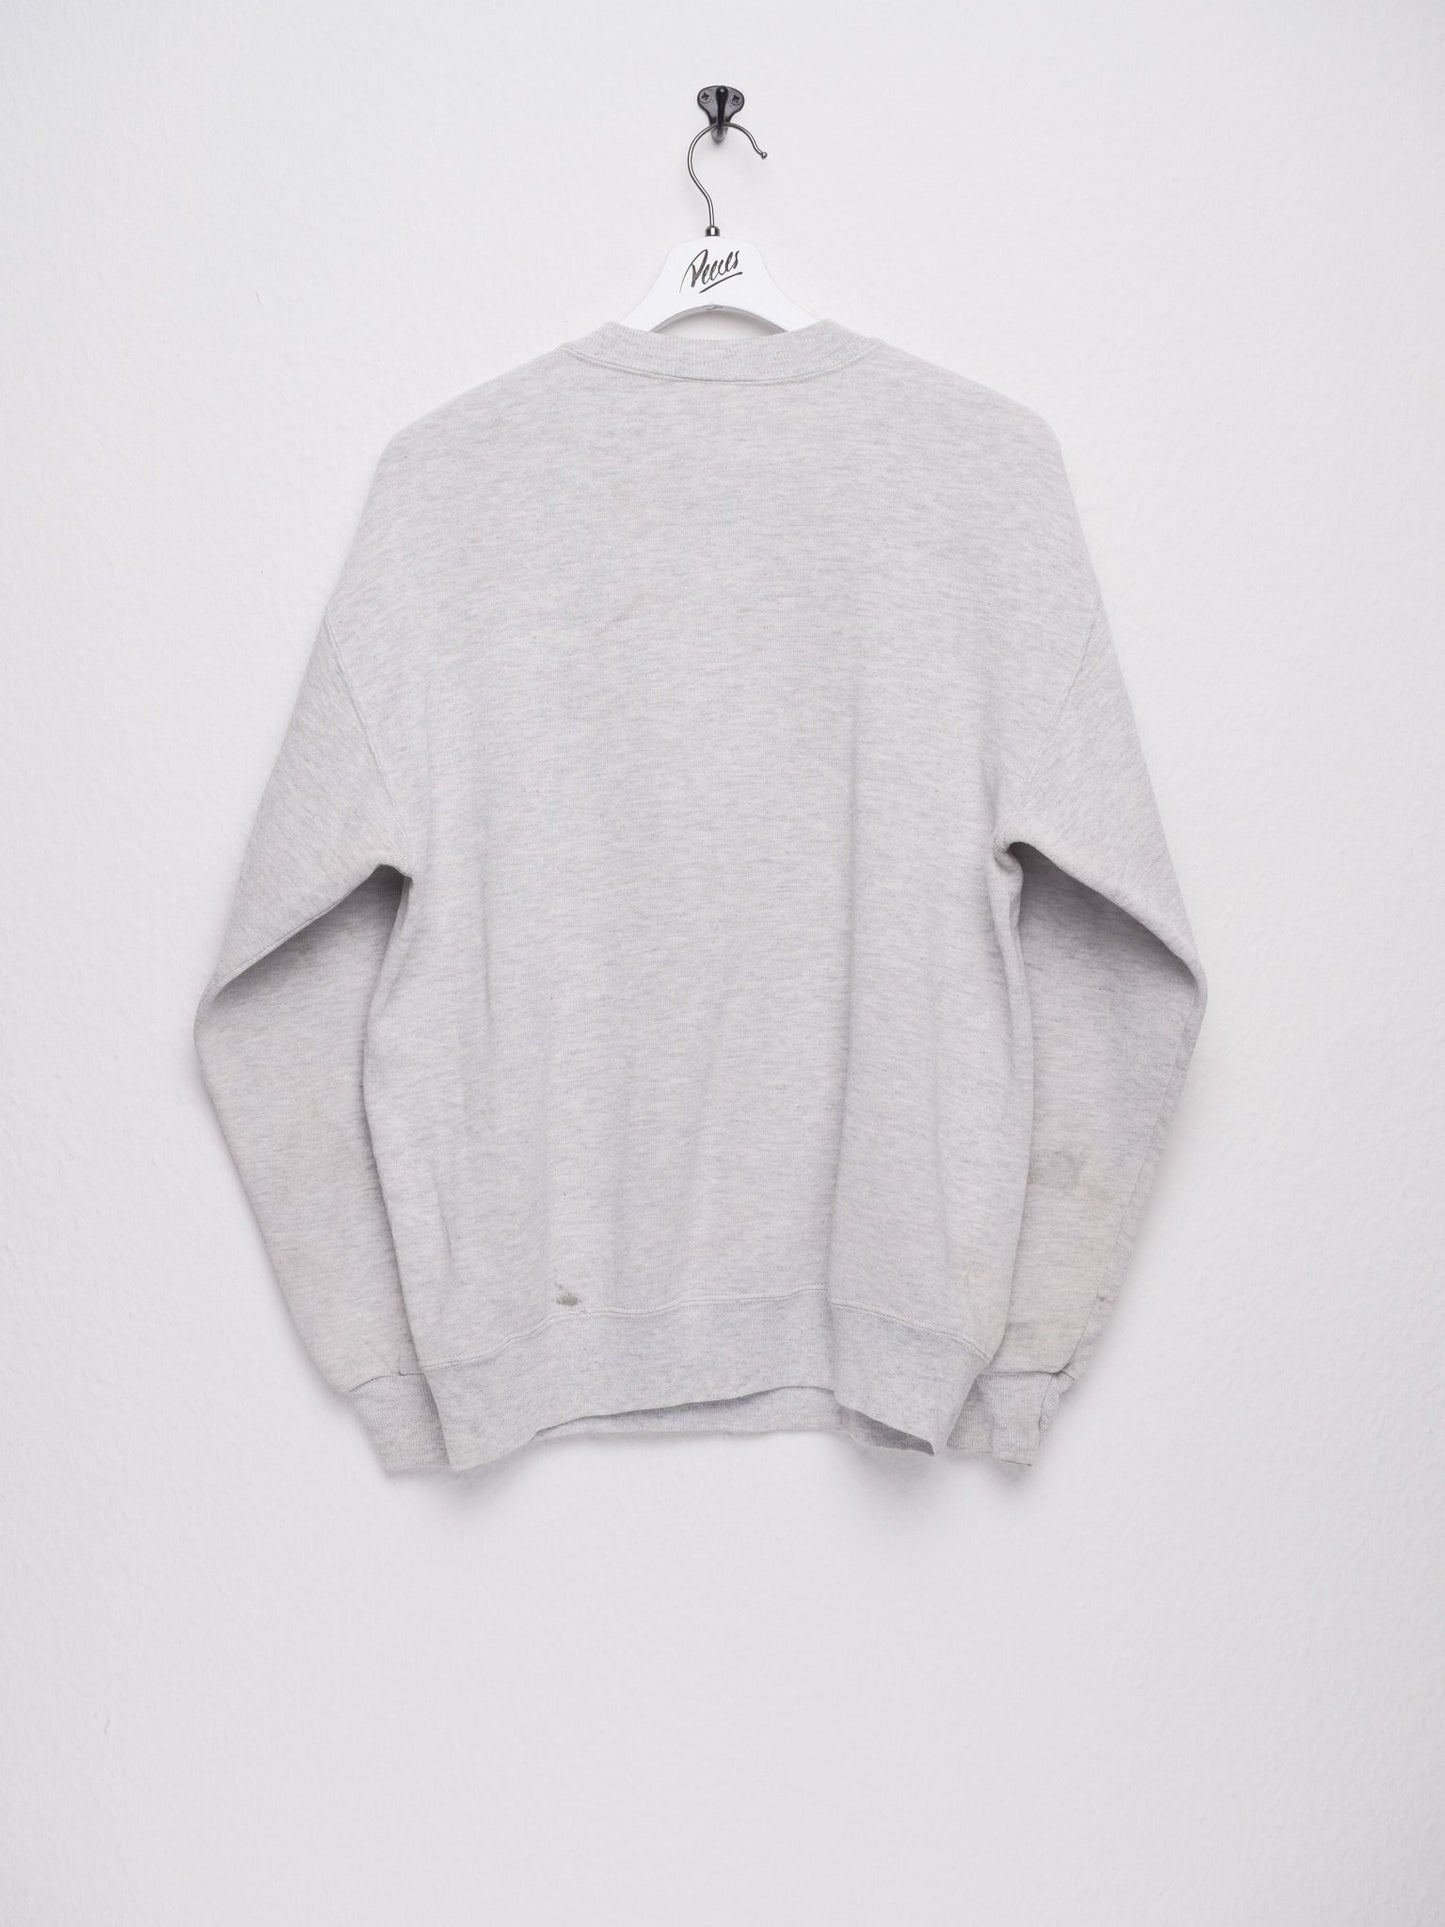 jerzees 'Roll Tide' embroidered Graphic grey Sweater - Peeces